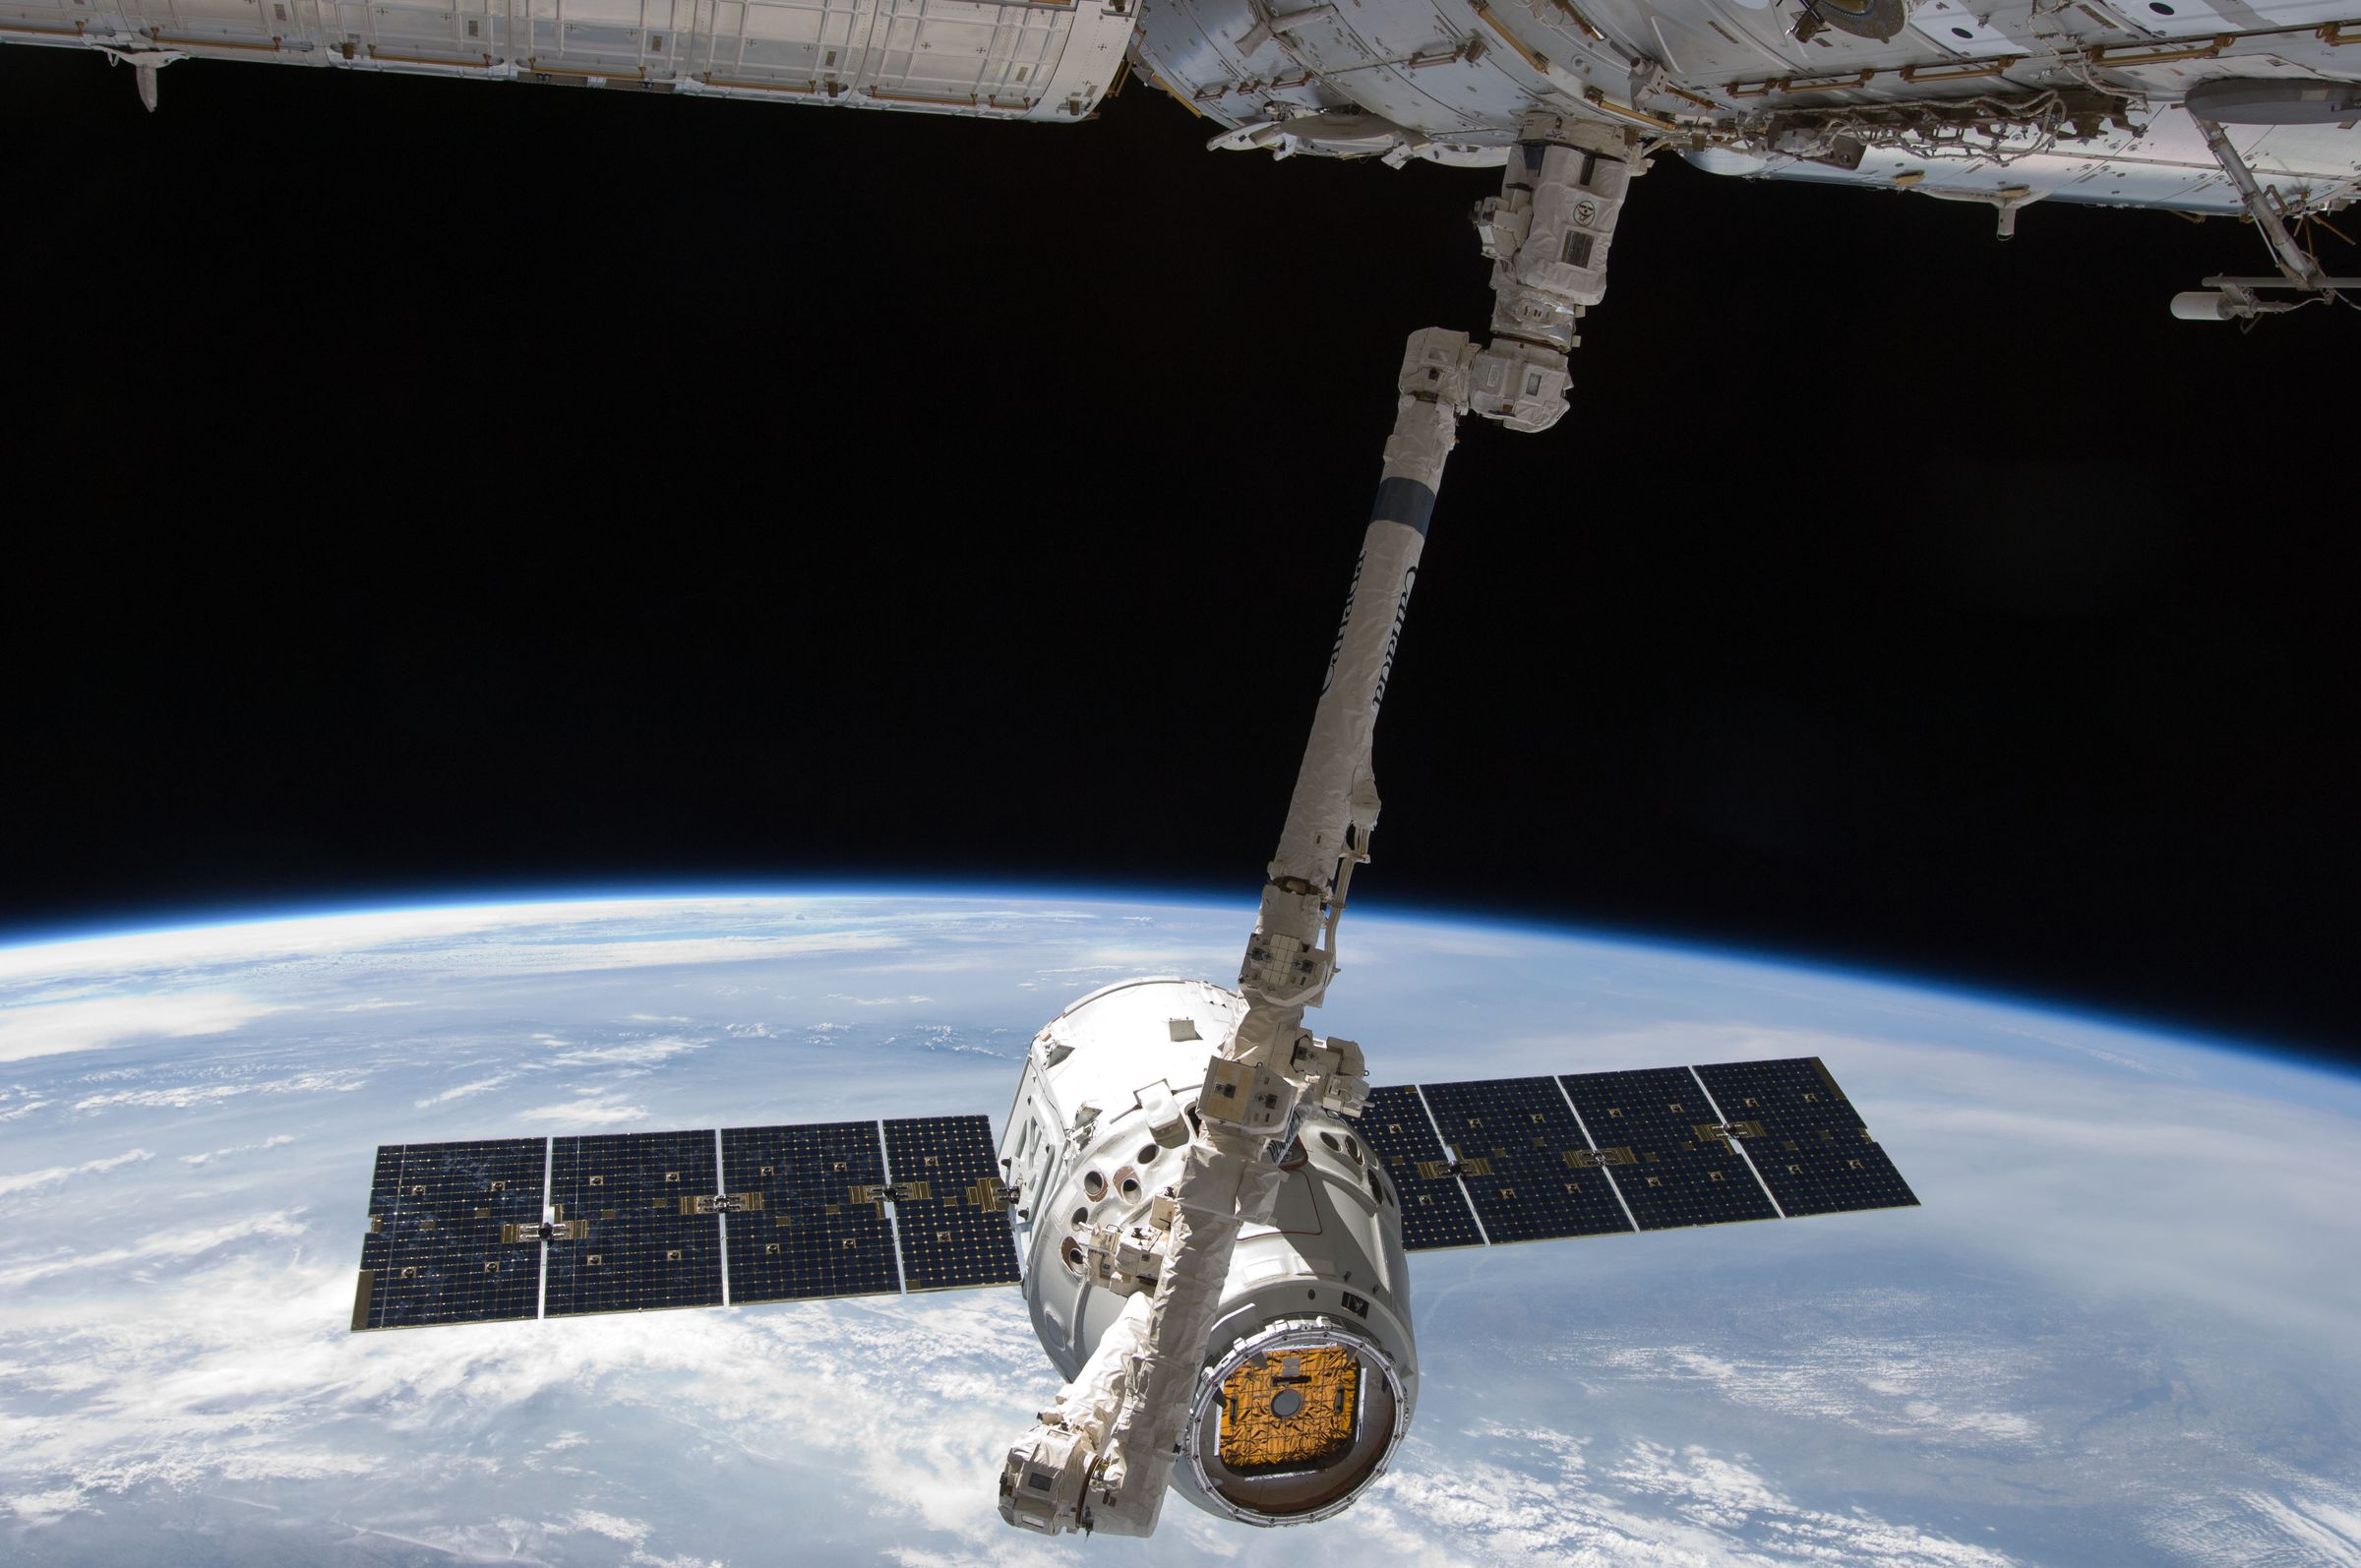 SpaceX’s Dragon, captured by the robotic arm on the International Space Station, in May 2012